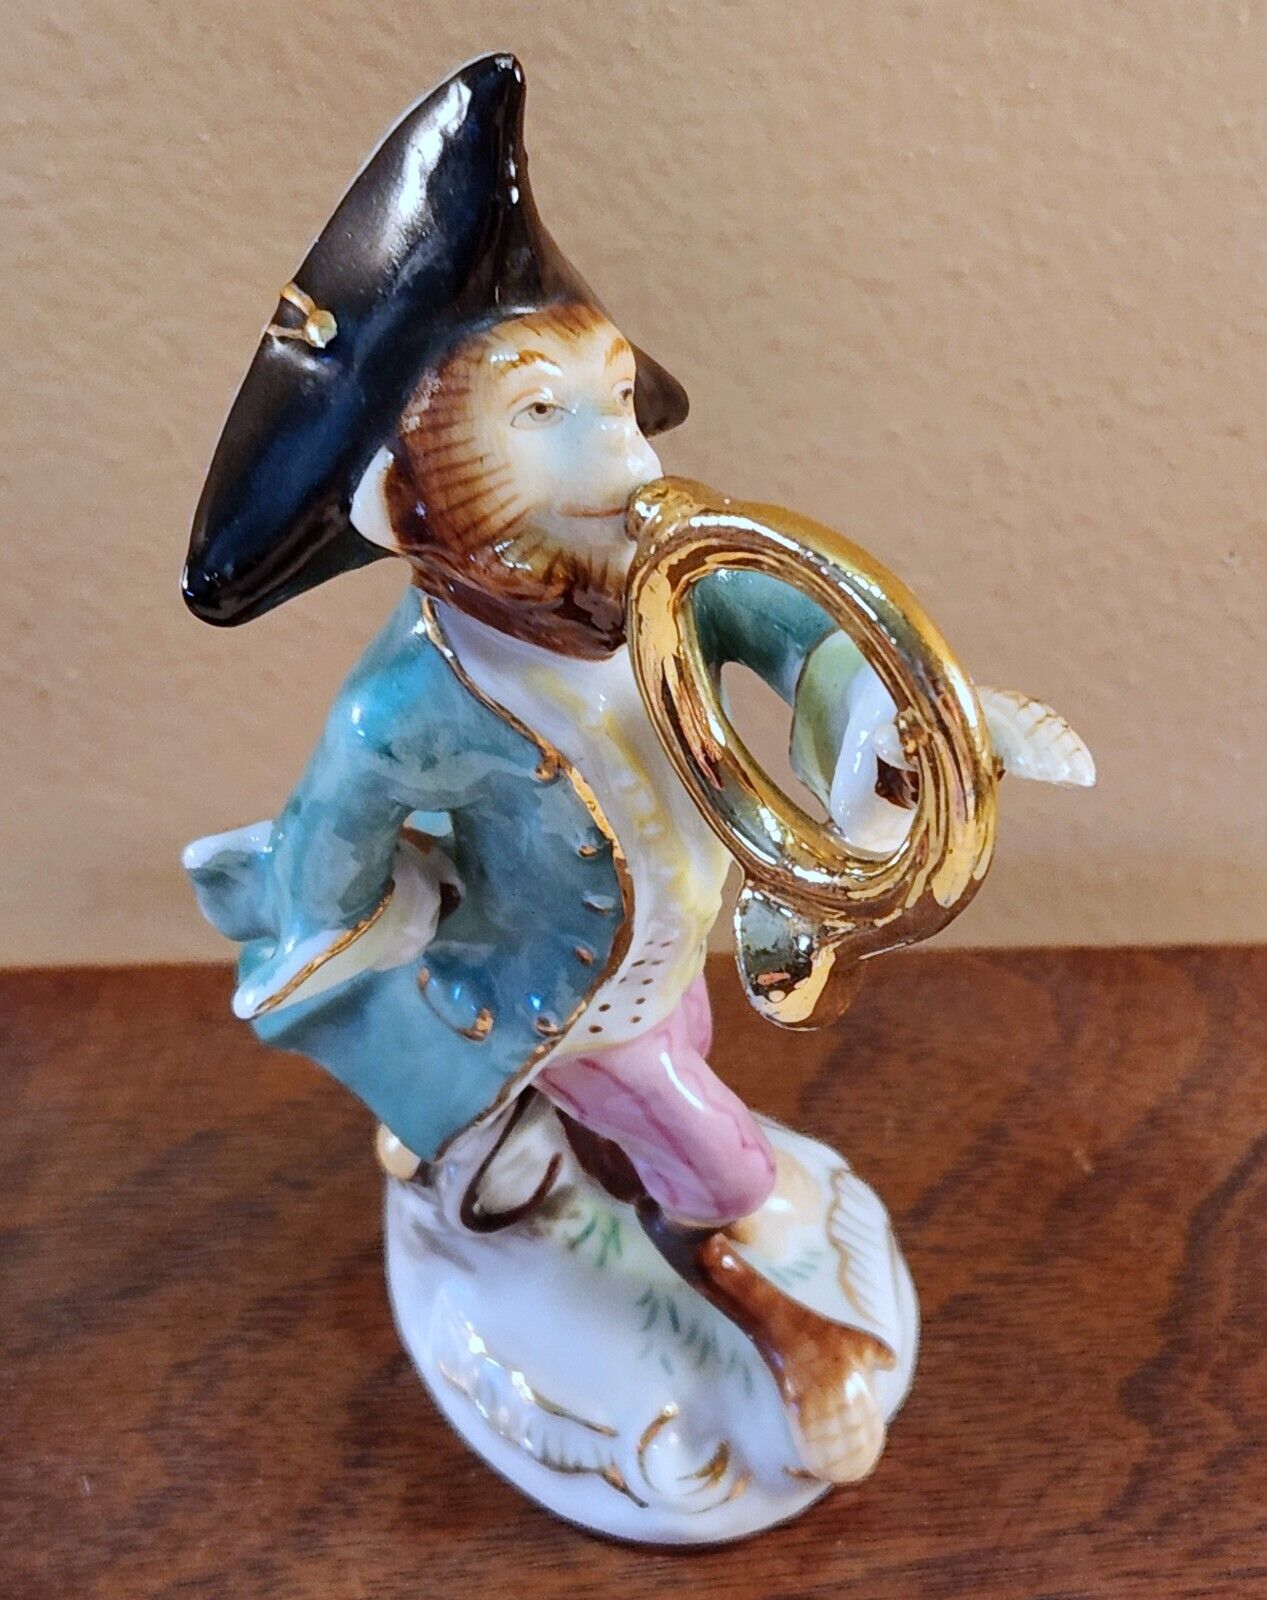 ANTIQUE ALFRED VOIGT SITZENDORF BAND MONKEY WITH FRENCH HORN